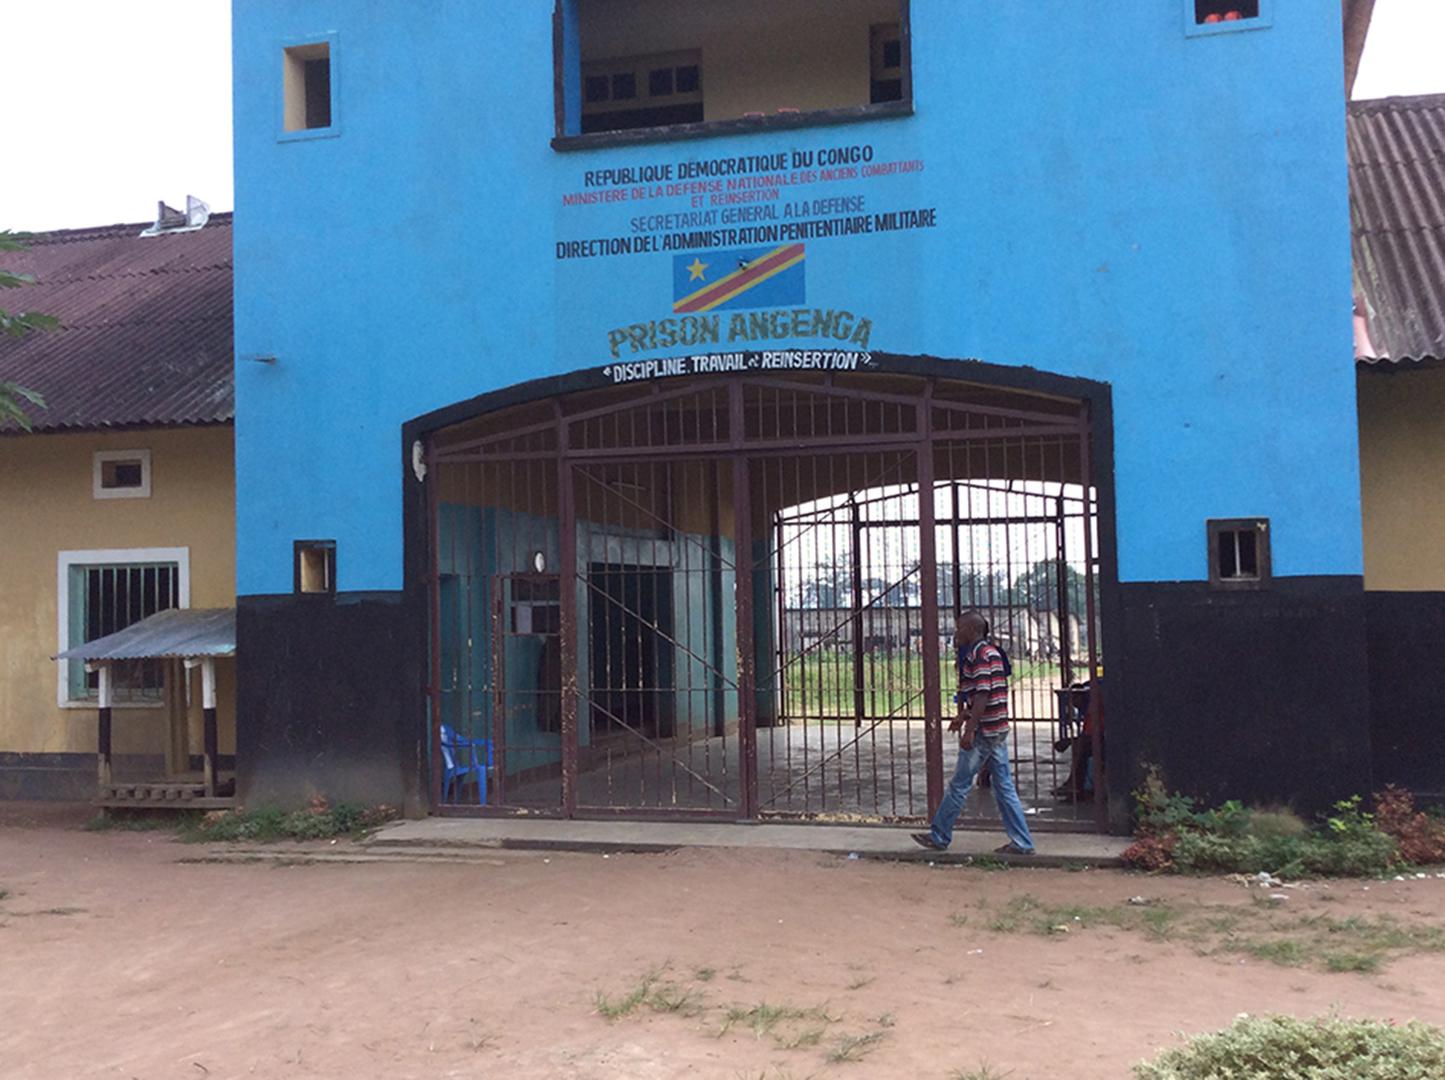 Angenga military prison in northwestern Democratic Republic of Congo, where alleged FDLR combatants were being held in late 2015, including at least 29 children. Nearly all of the children were removed in early 2016.